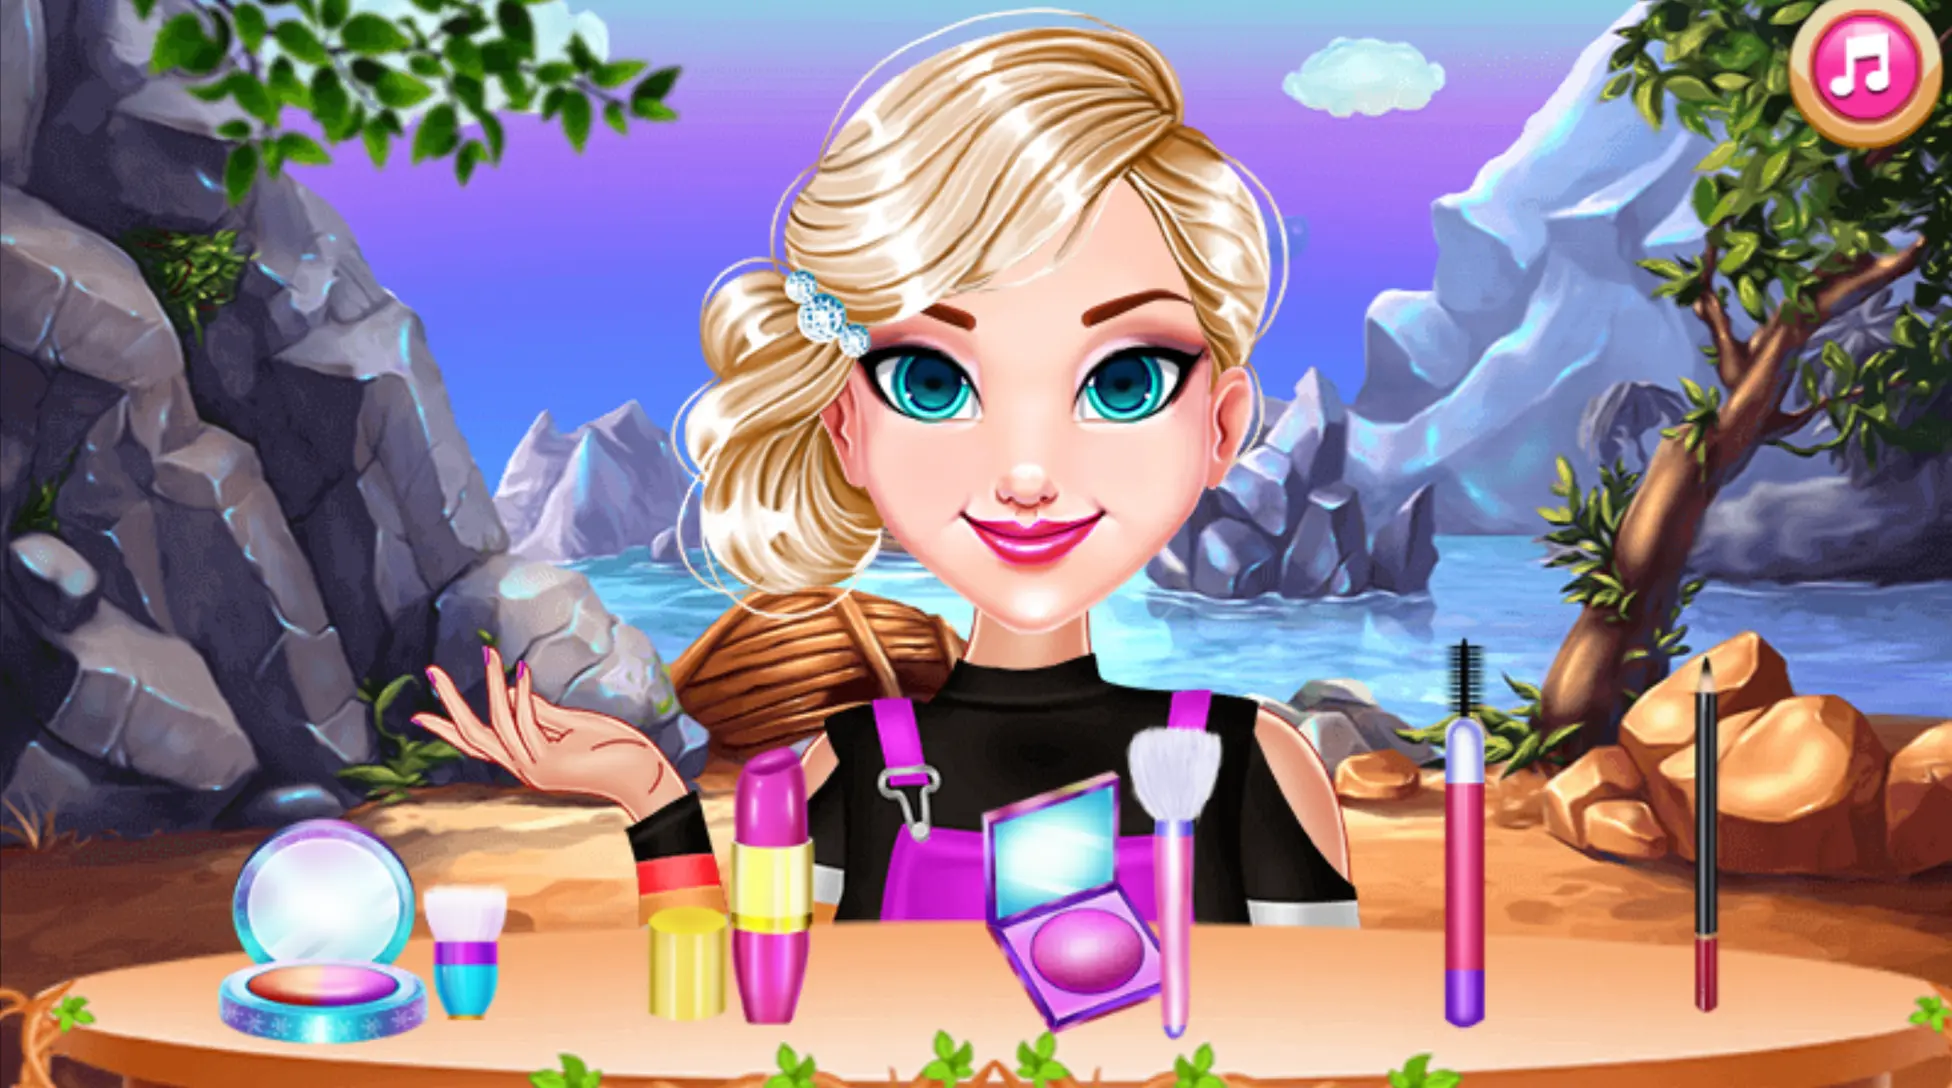 BFF Fairytale Makeover